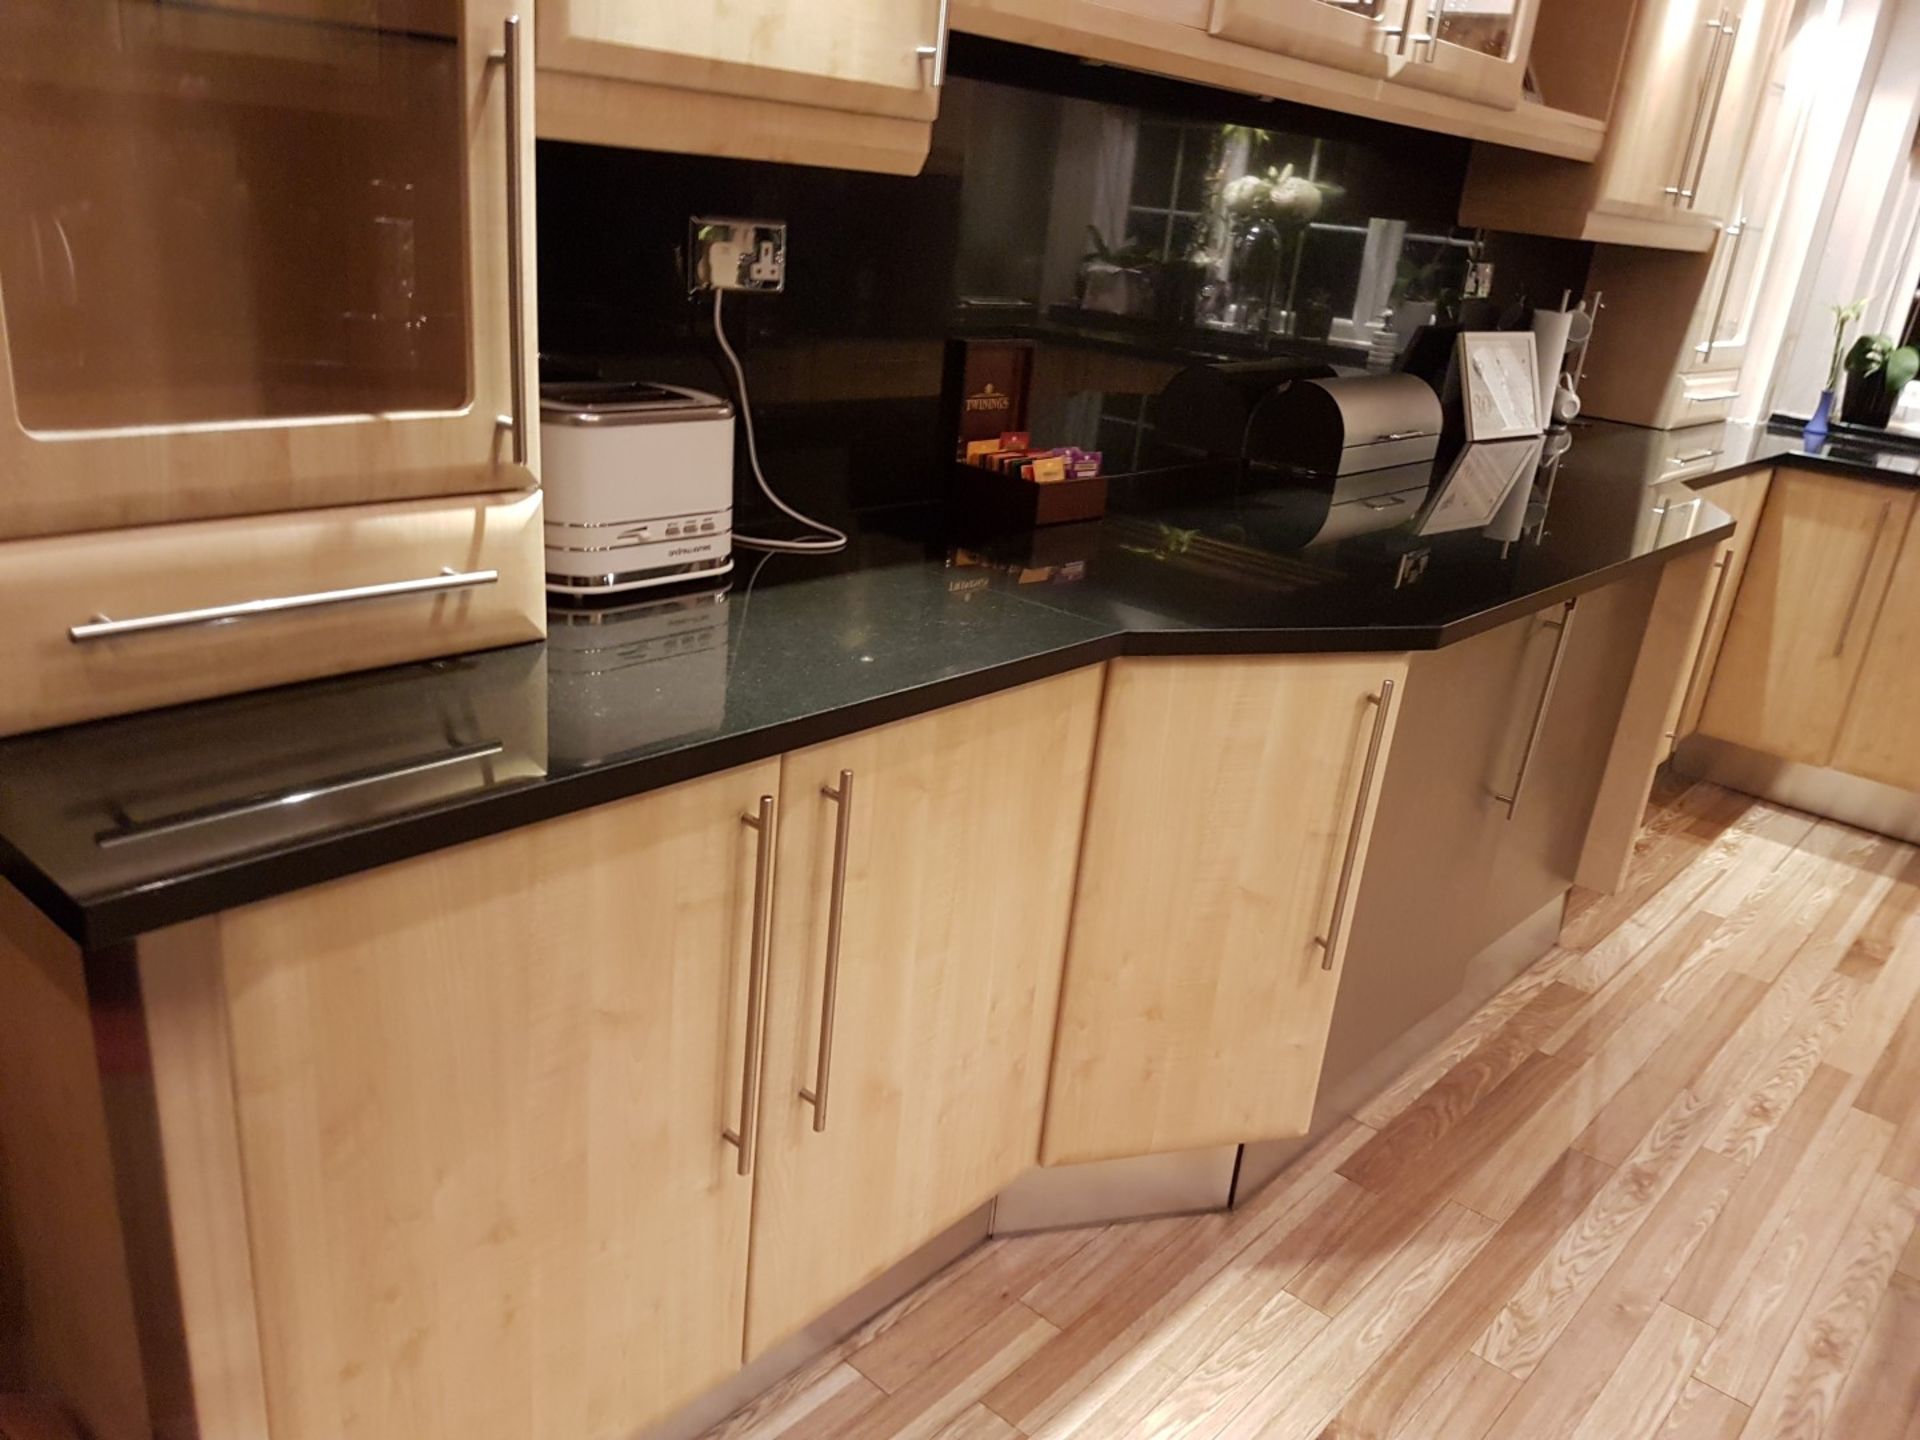 1 x Bespoke Fitted Kitchen With Granite Worktops And Integral NEFF Appliances - CL216 - Location: - Image 31 of 46